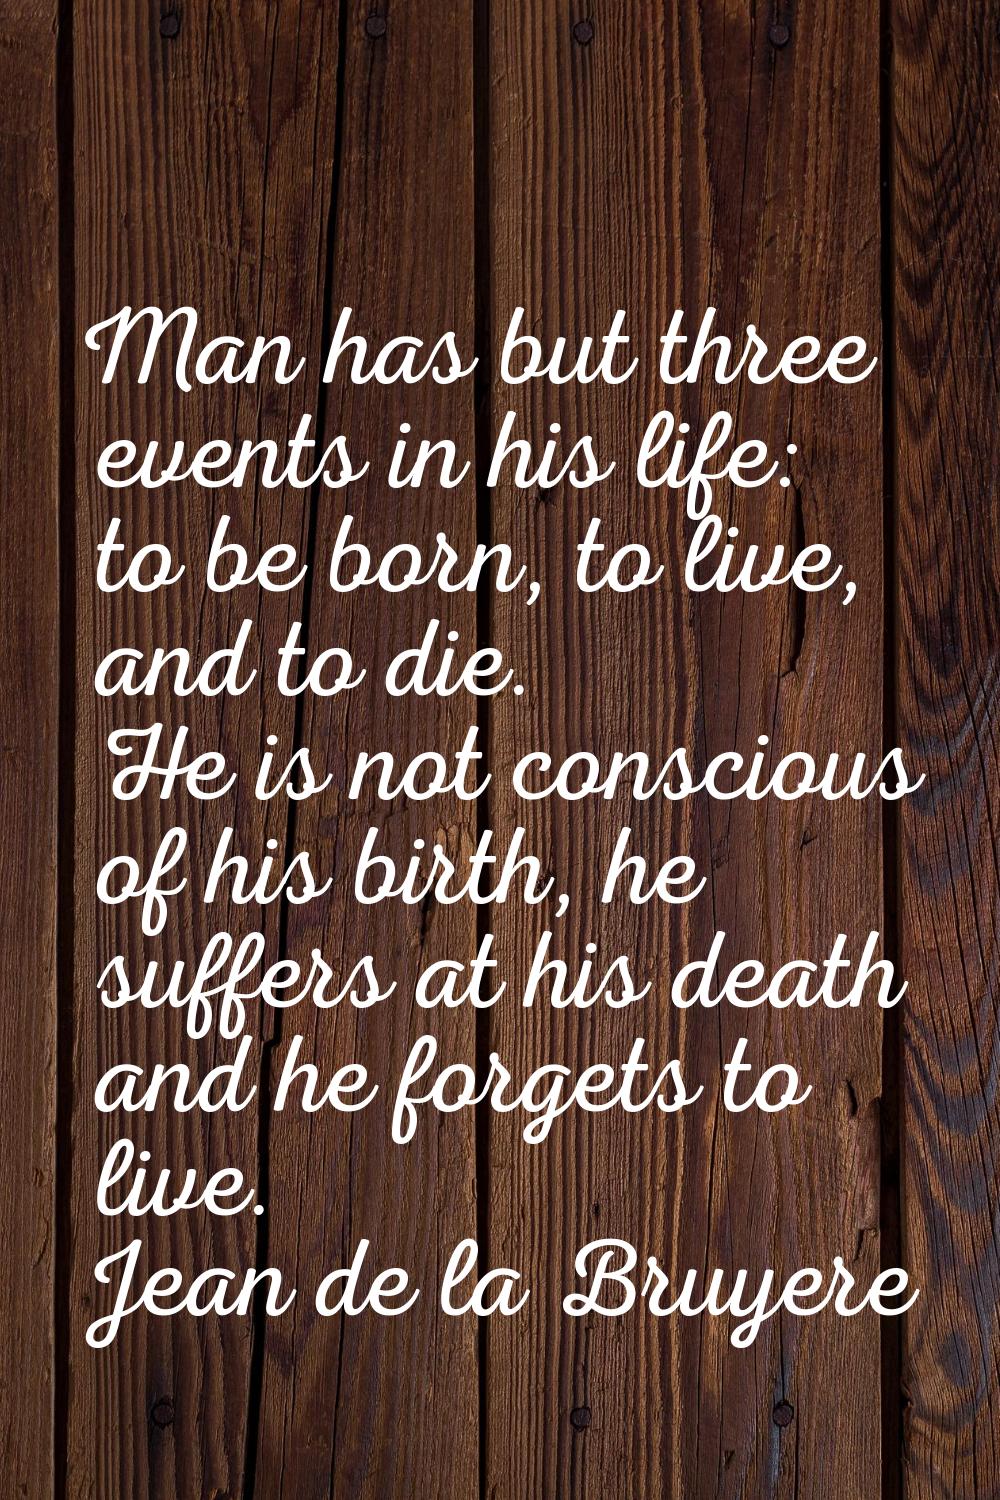 Man has but three events in his life: to be born, to live, and to die. He is not conscious of his b